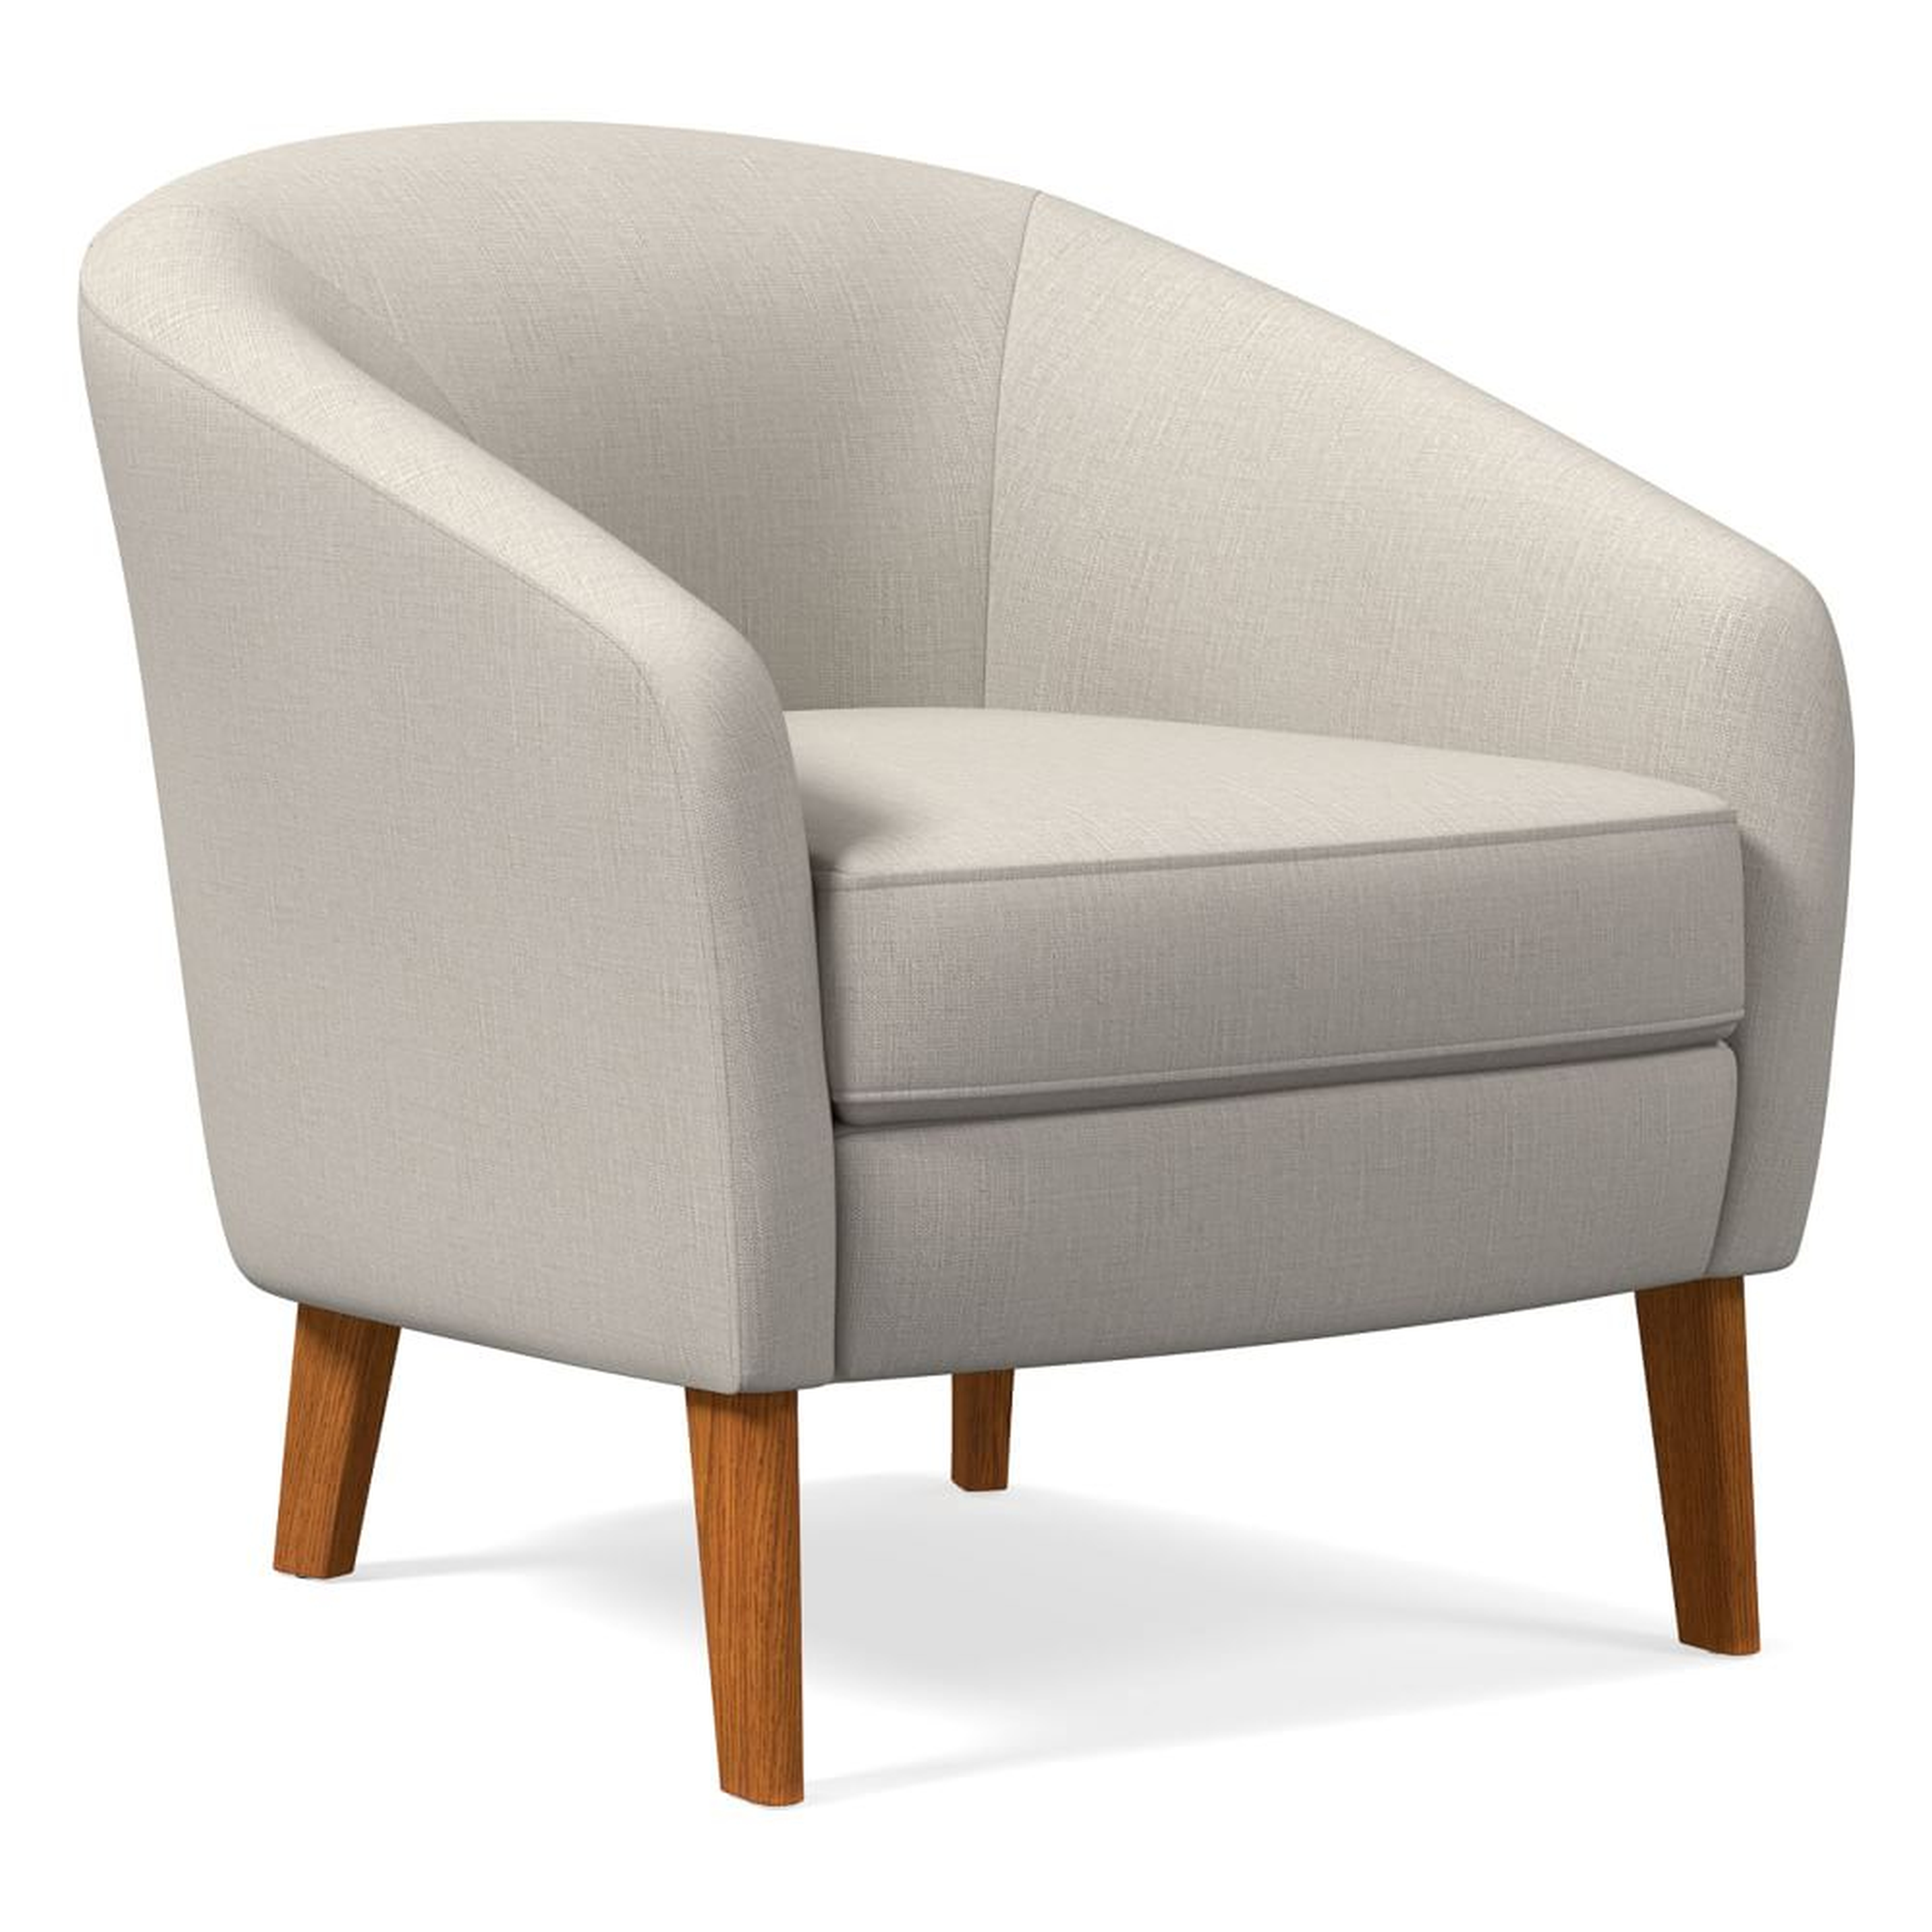 Jonah Chair, Poly, Yarn Dyed Linen Weave, Alabaster, Pecan - West Elm